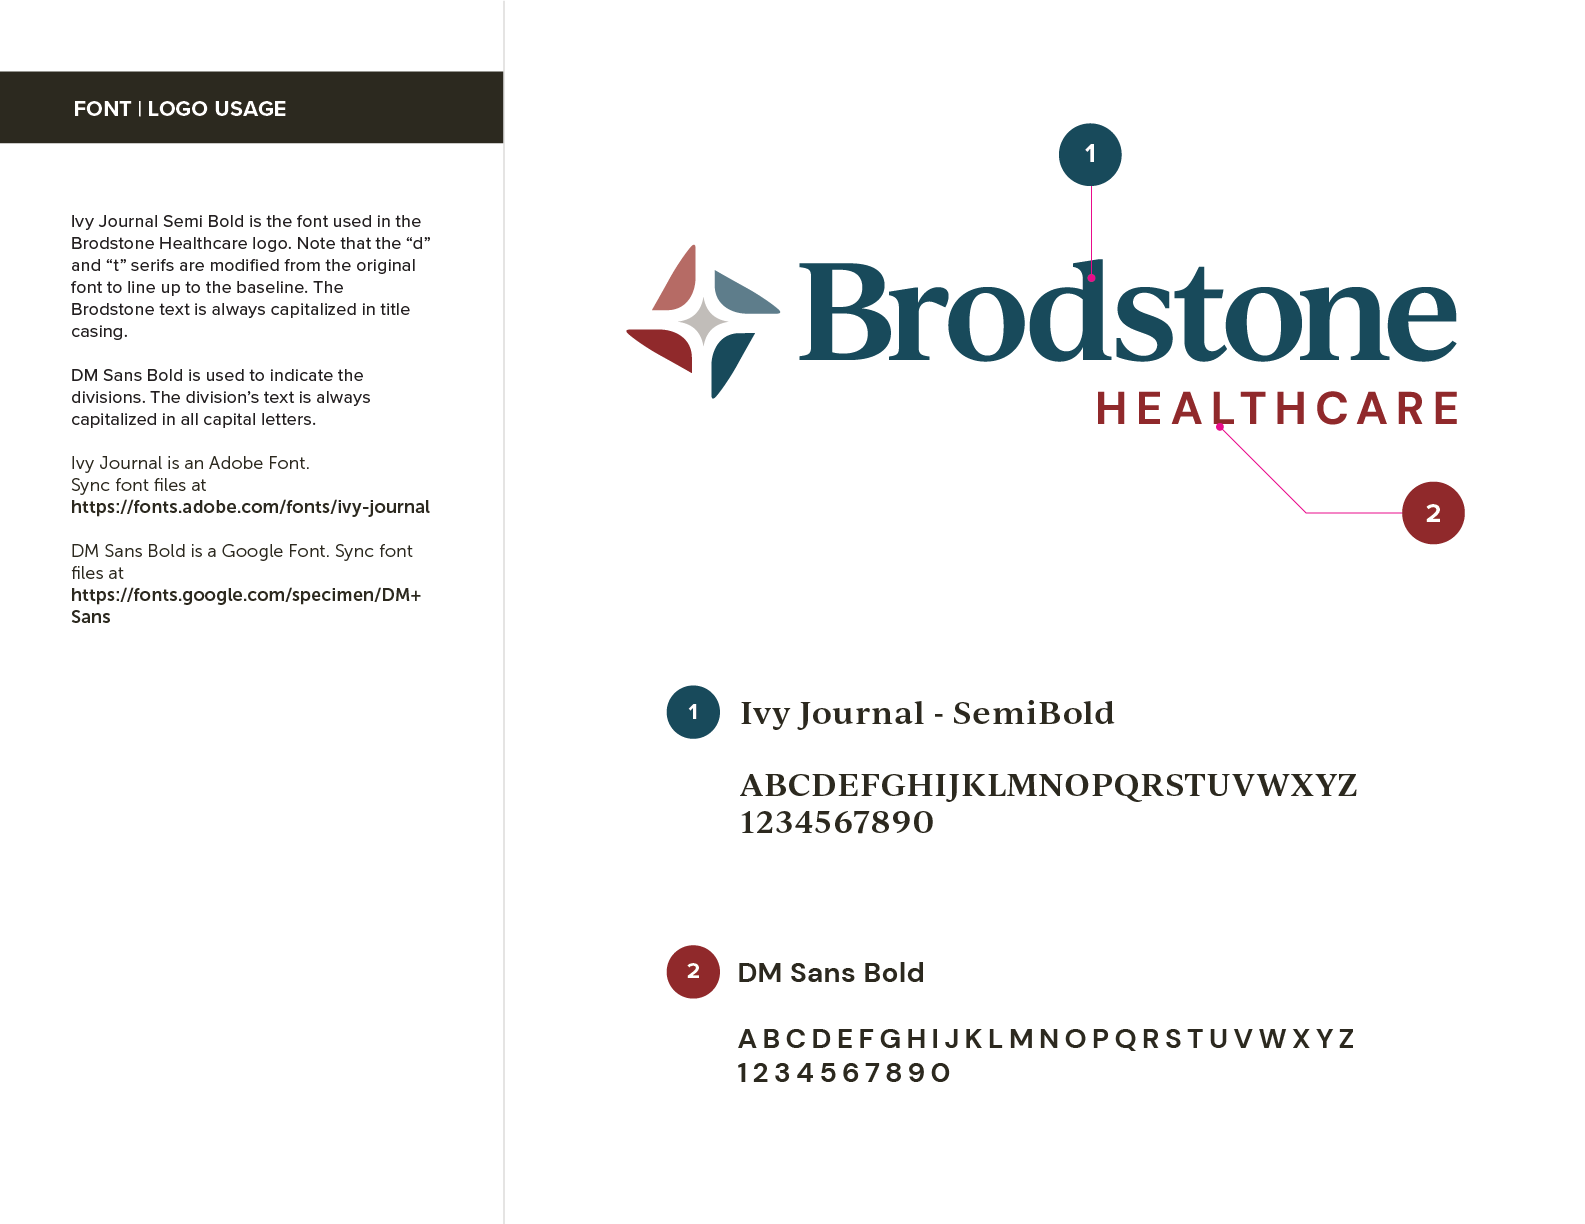 Brodstone Healthcare Brand Guide Fonts